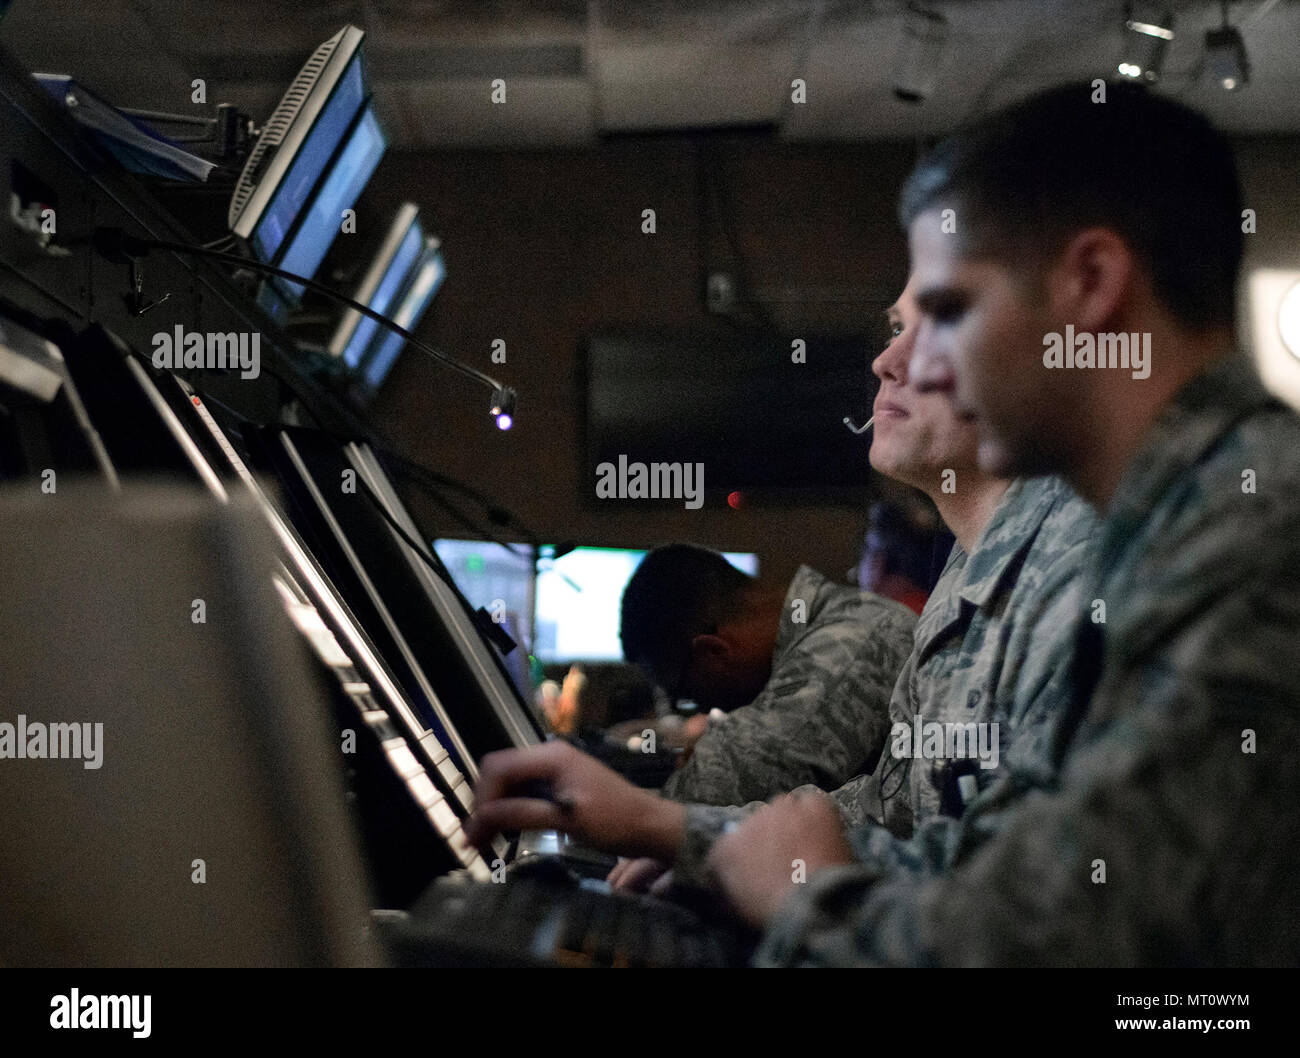 Airmen from the 71st Operations Support Squadron at work at the Radar Approach Control facility at Vance Air Force Base, Oklahoma, July 10. Clearance and Delivery air traffic controllers like the ones you see here receive and confirm flight plans before filtering them to awaiting controllers. (U.S. Air Force photo by David Poe) Stock Photo